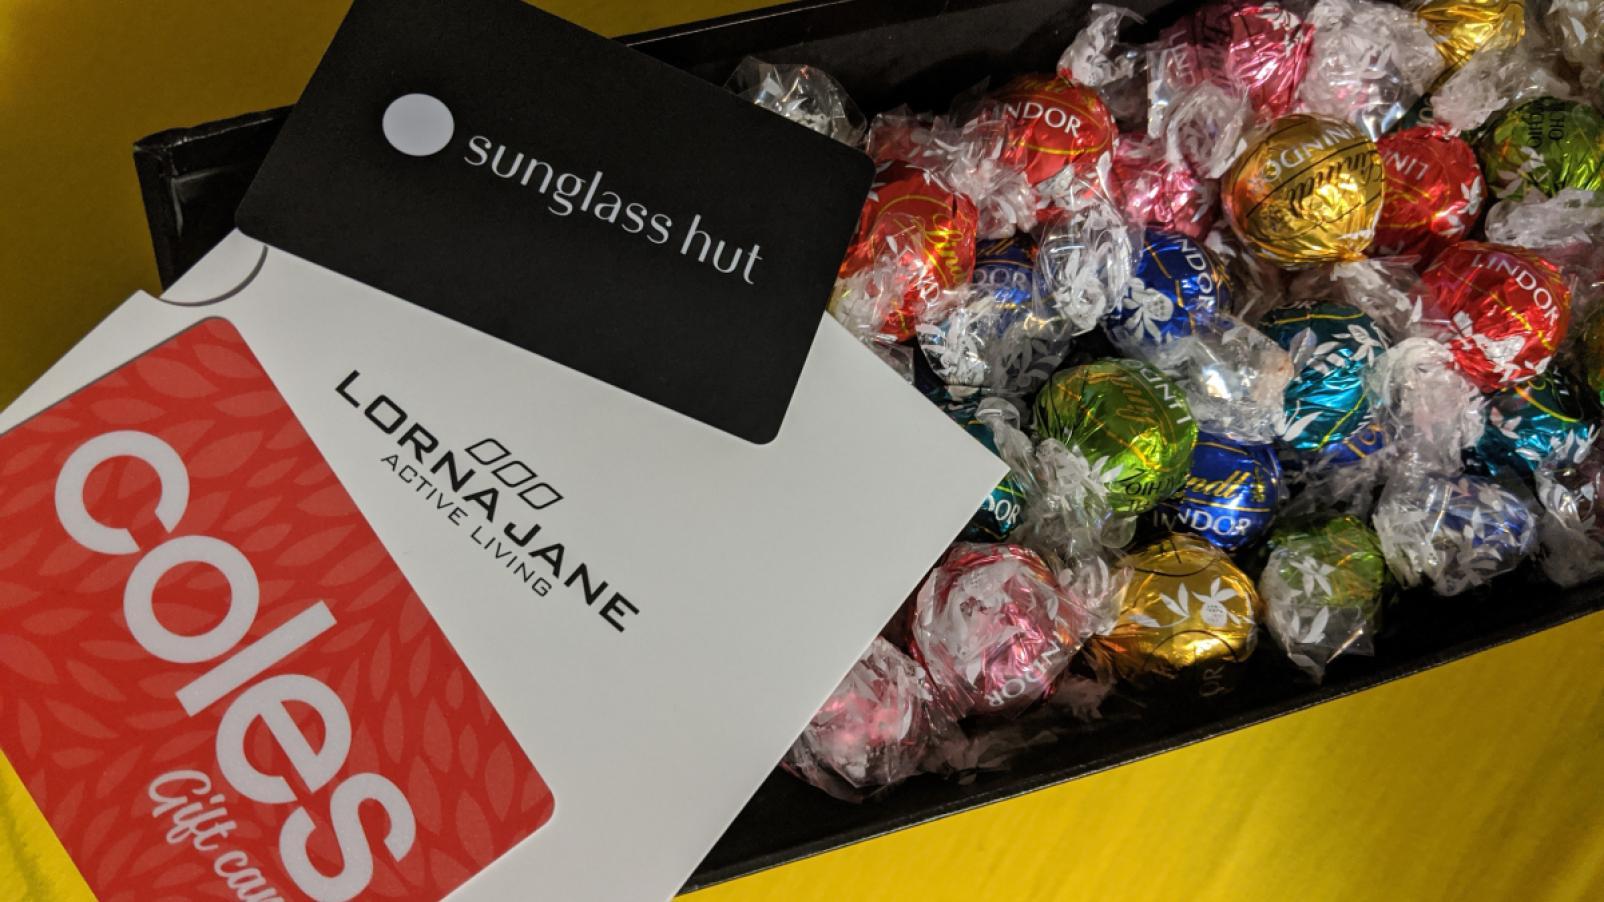 A box of Lindor chocolates, and gift cards from Coles, Lorna Jane and Sunglass Hut.